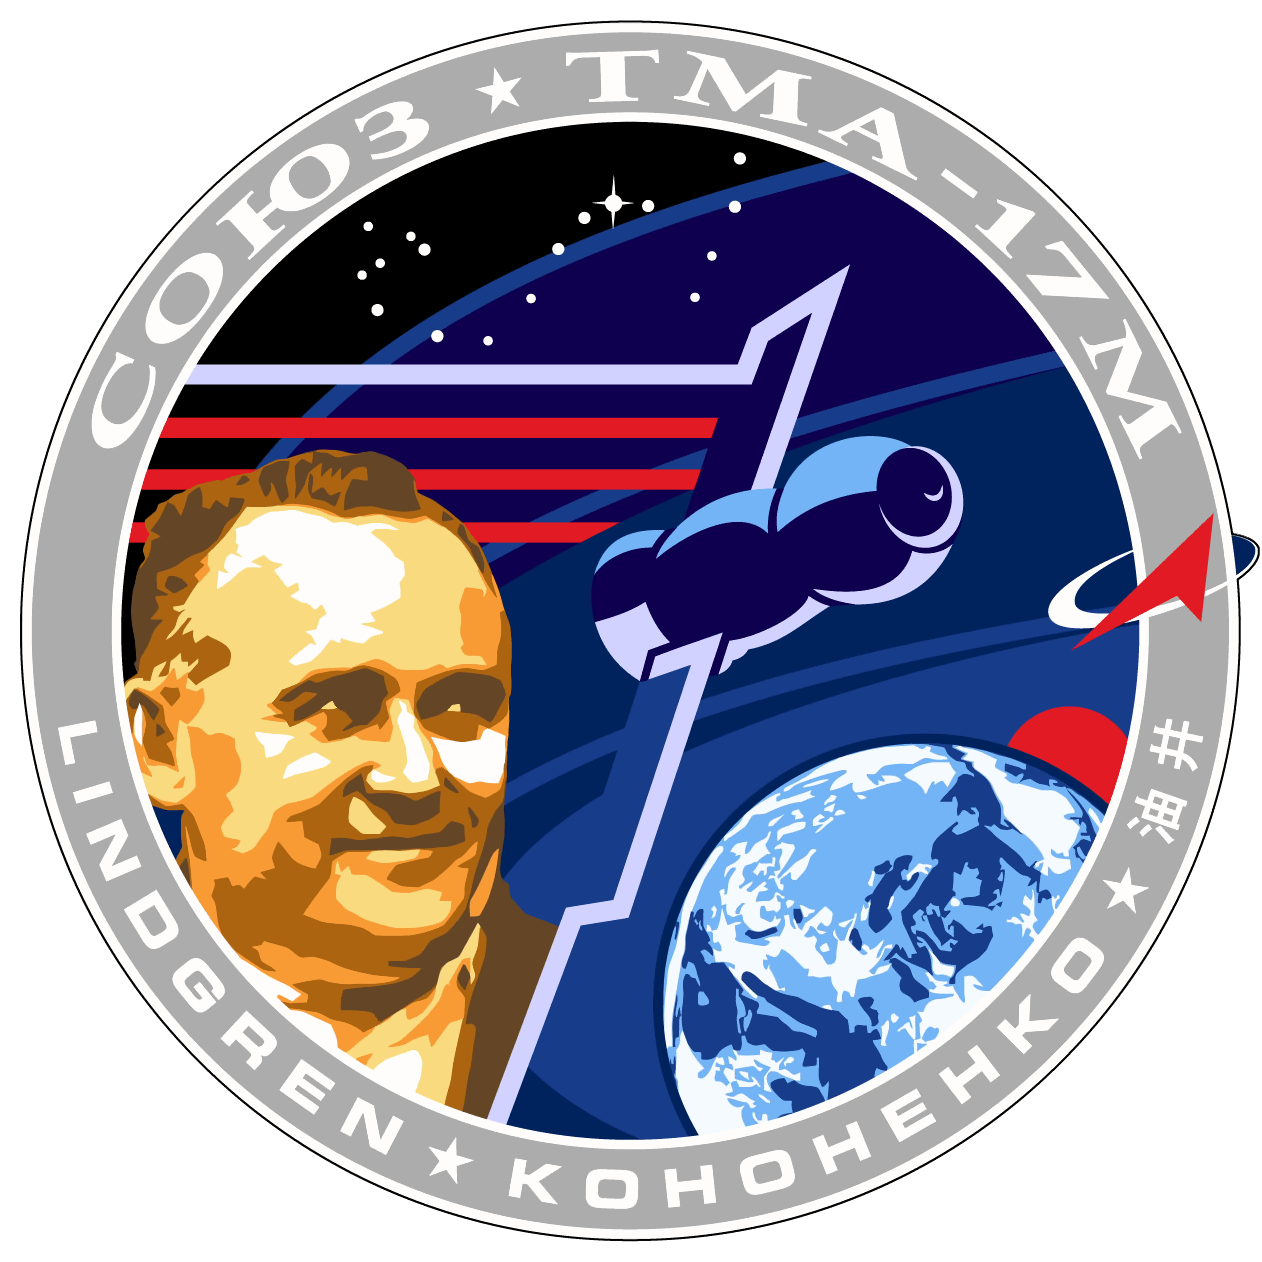 Mission patch for ISS 44